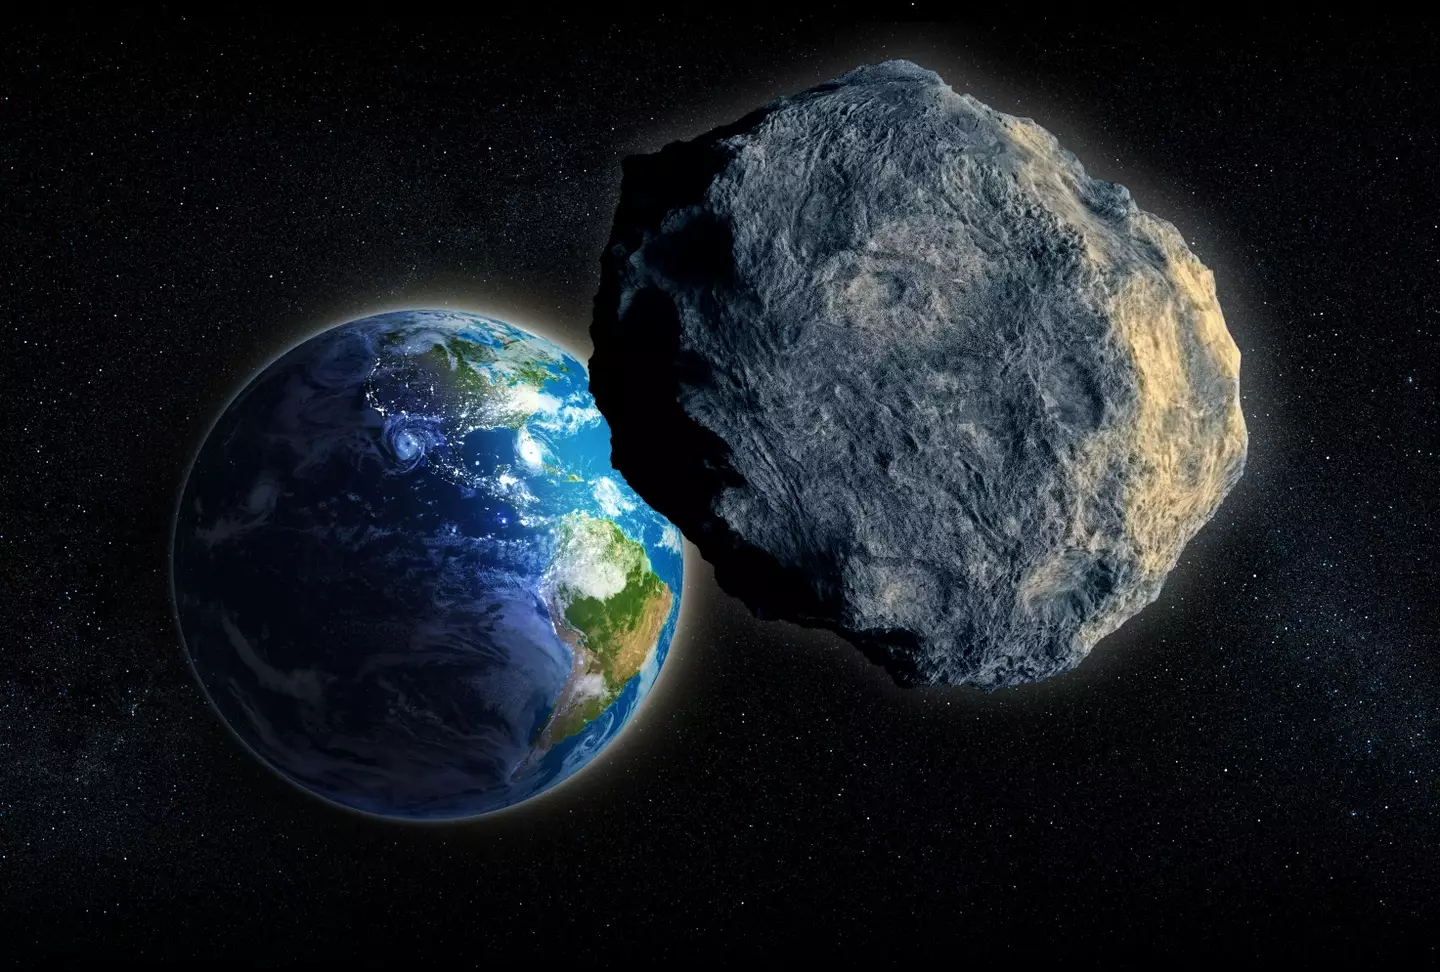 A giant asteroid hurtling towards Earth would put a bit of a downer on things.